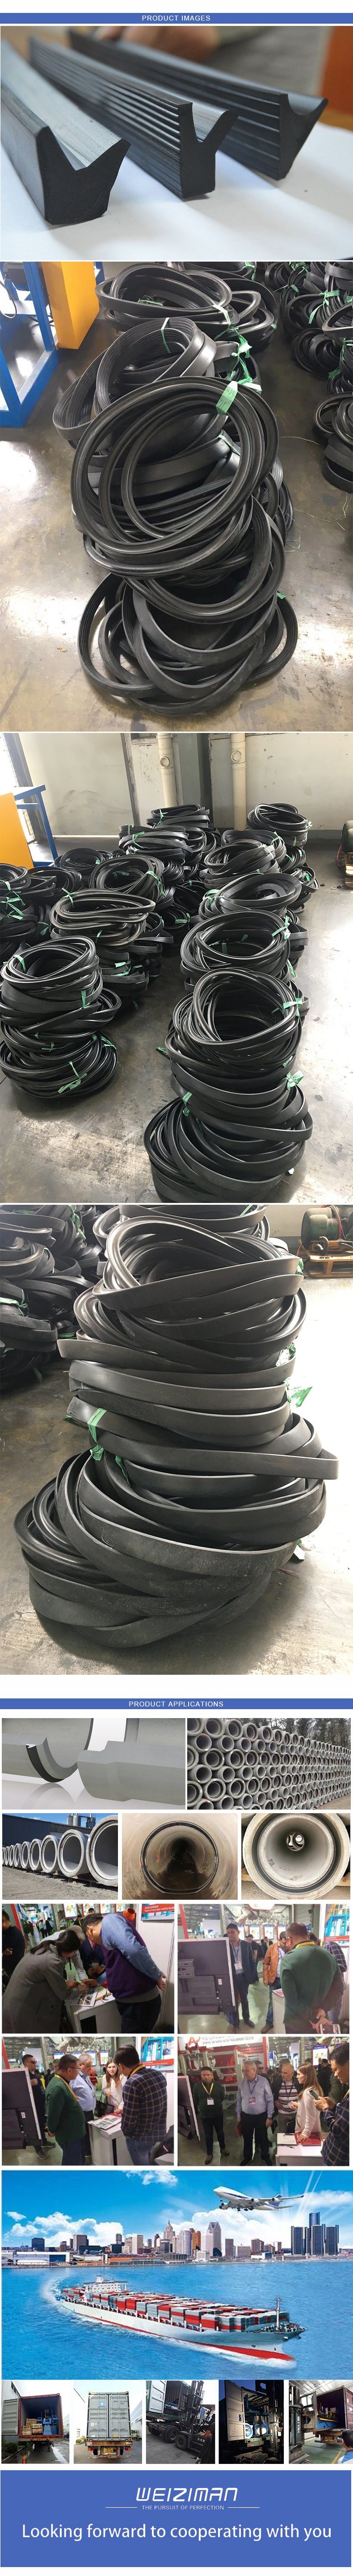 Extruded EPDM Rubber Seals and Gaskets